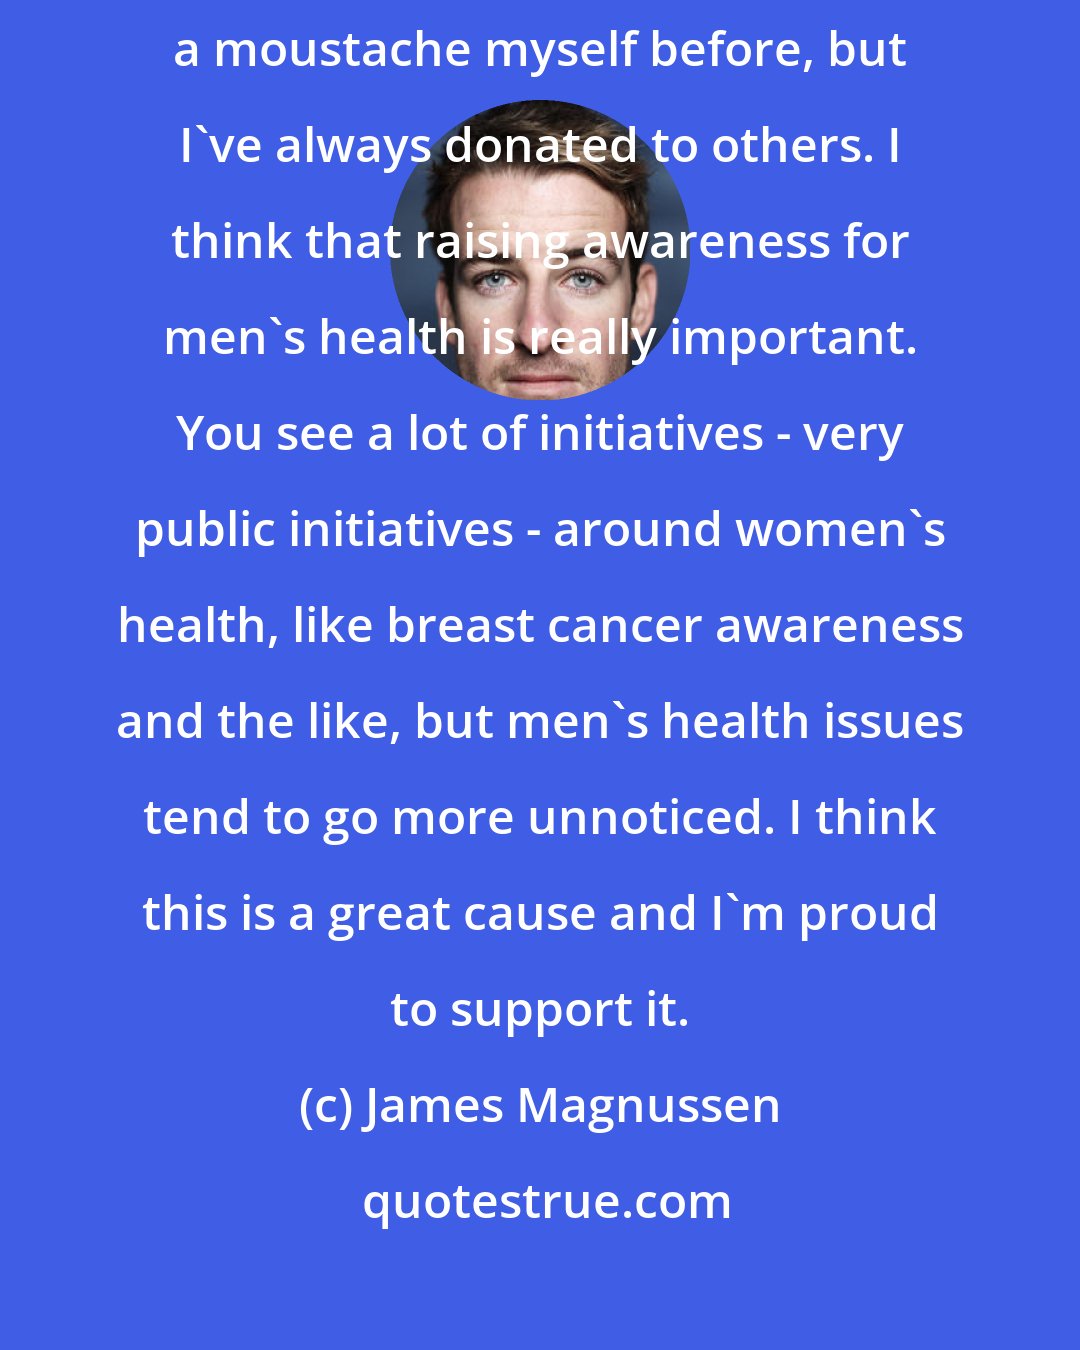 James Magnussen: Movember is an event that I've supported for a number of years. I haven't grown a moustache myself before, but I've always donated to others. I think that raising awareness for men's health is really important. You see a lot of initiatives - very public initiatives - around women's health, like breast cancer awareness and the like, but men's health issues tend to go more unnoticed. I think this is a great cause and I'm proud to support it.